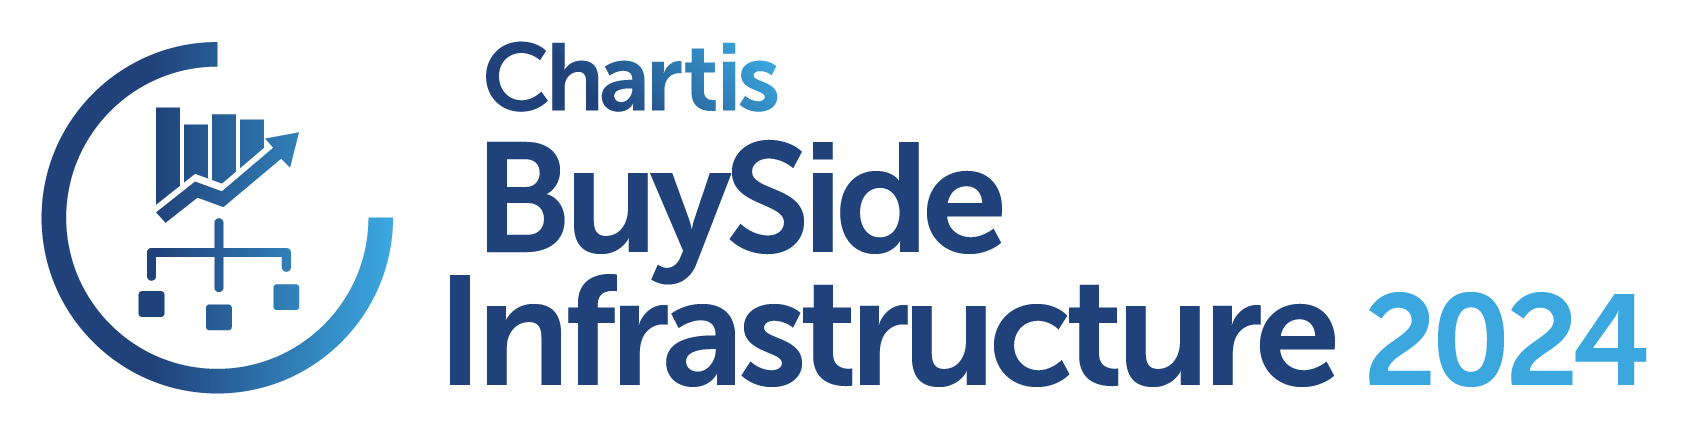 Chartis BuySide Infrastructure